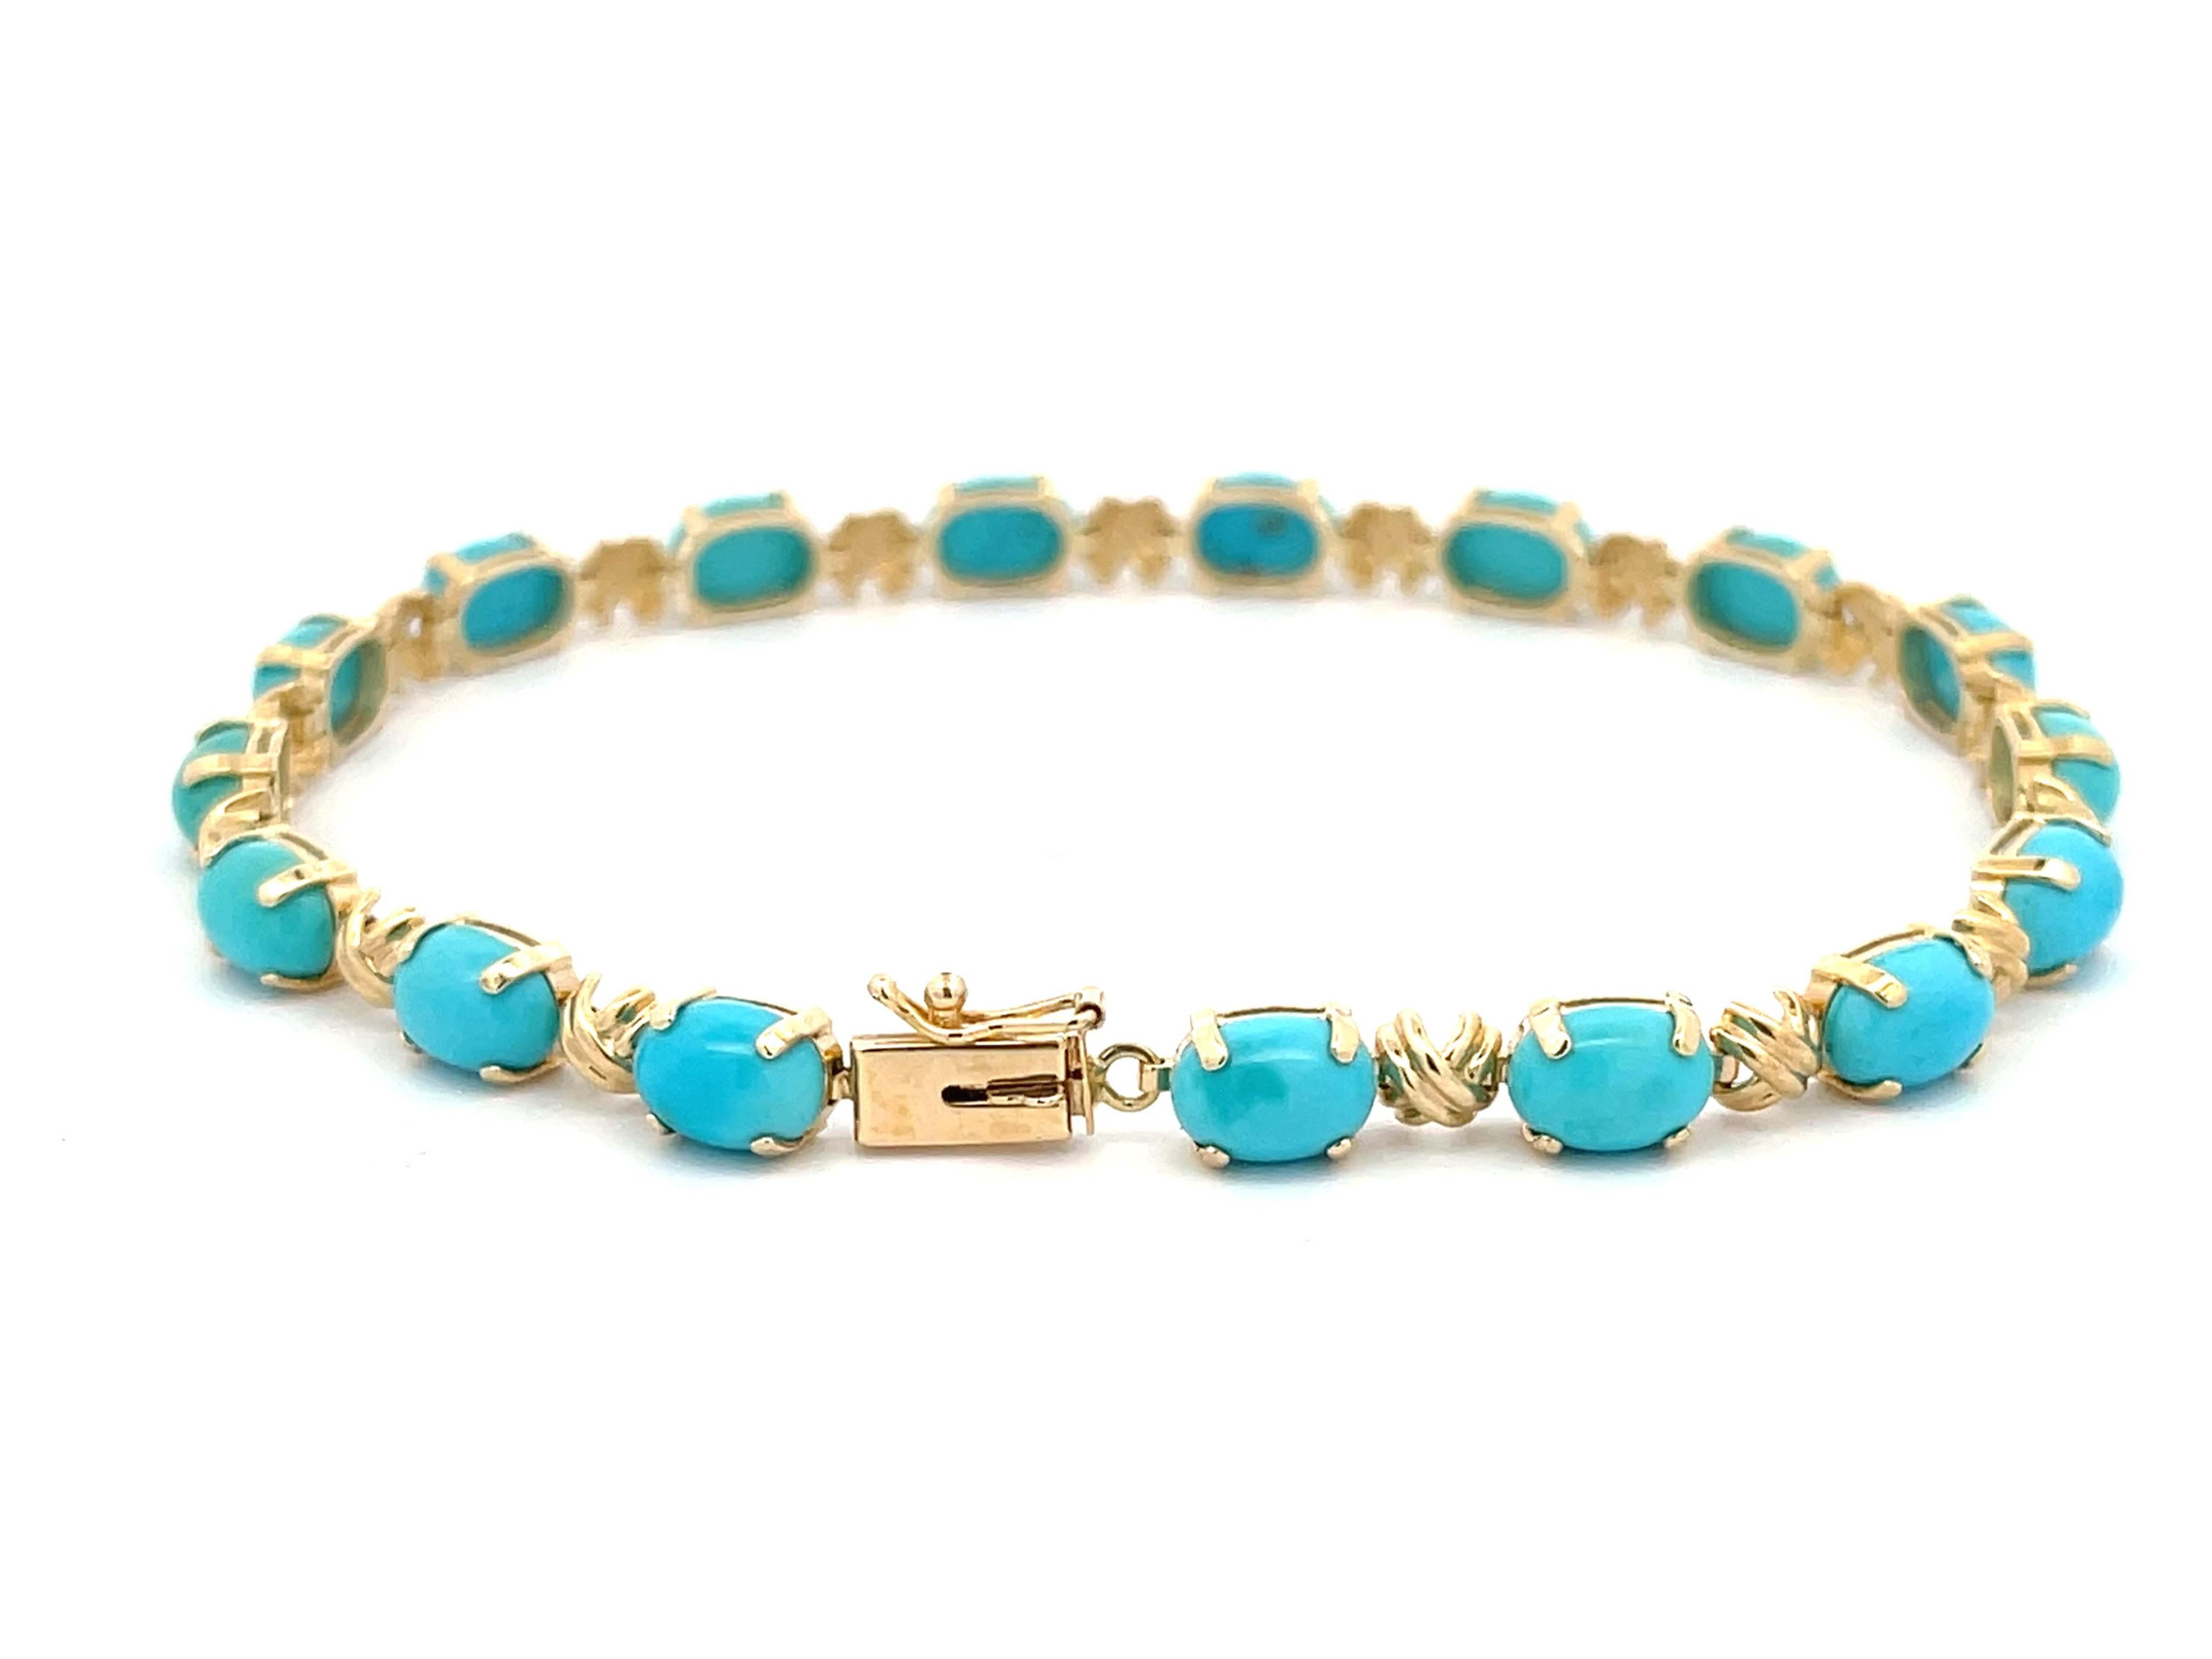 Women's Turquoise Bracelet in 14k Yellow Gold For Sale